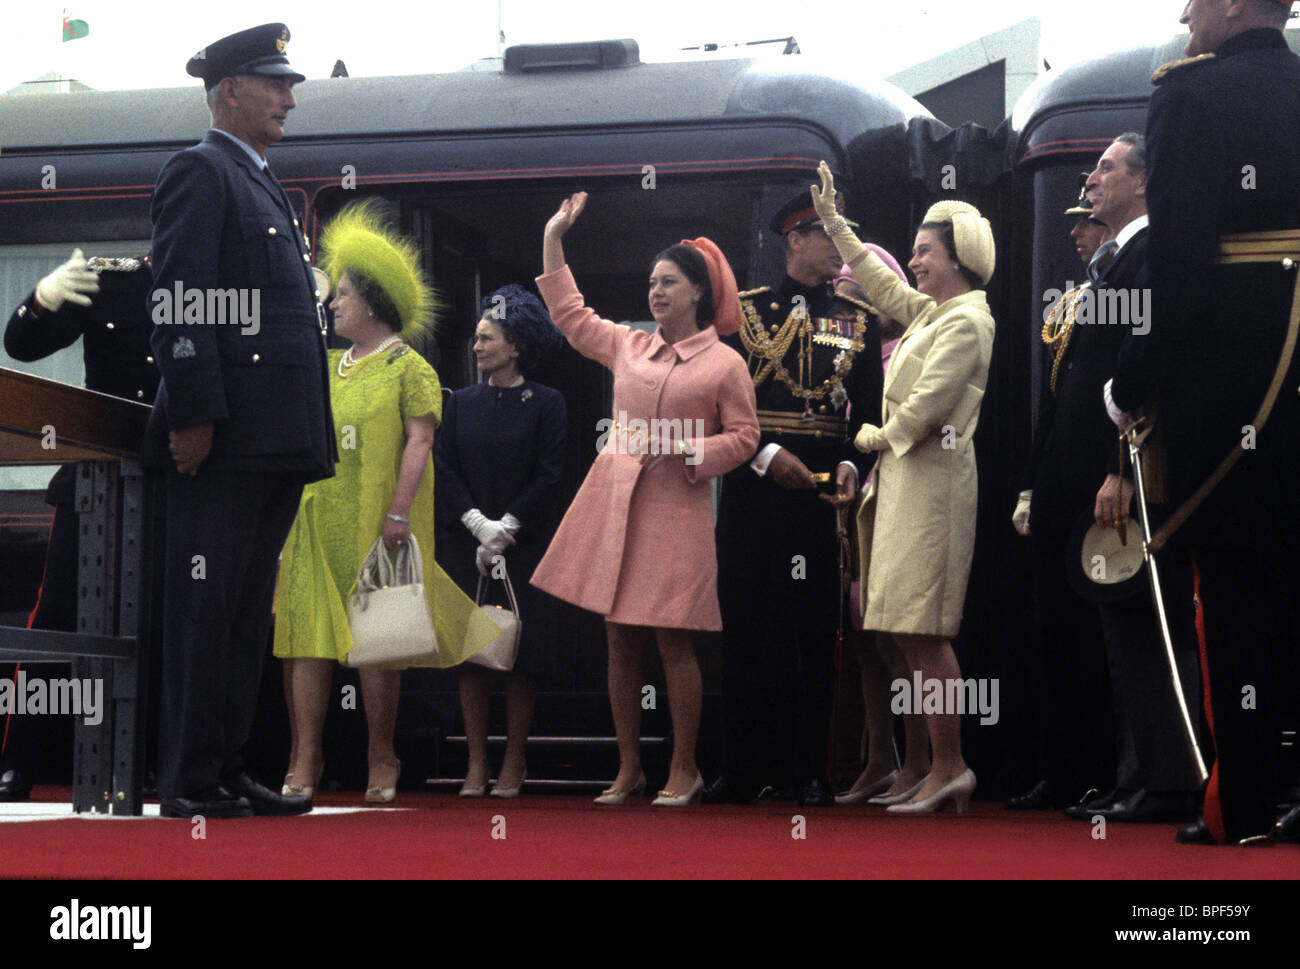 Members of the Royal family LtoR Queen Mother, Princess Alice, Princess Margaret, Duchess of Kent, Prince Philip and The Queen. Picture by DAVE BAGNALL Stock Photo